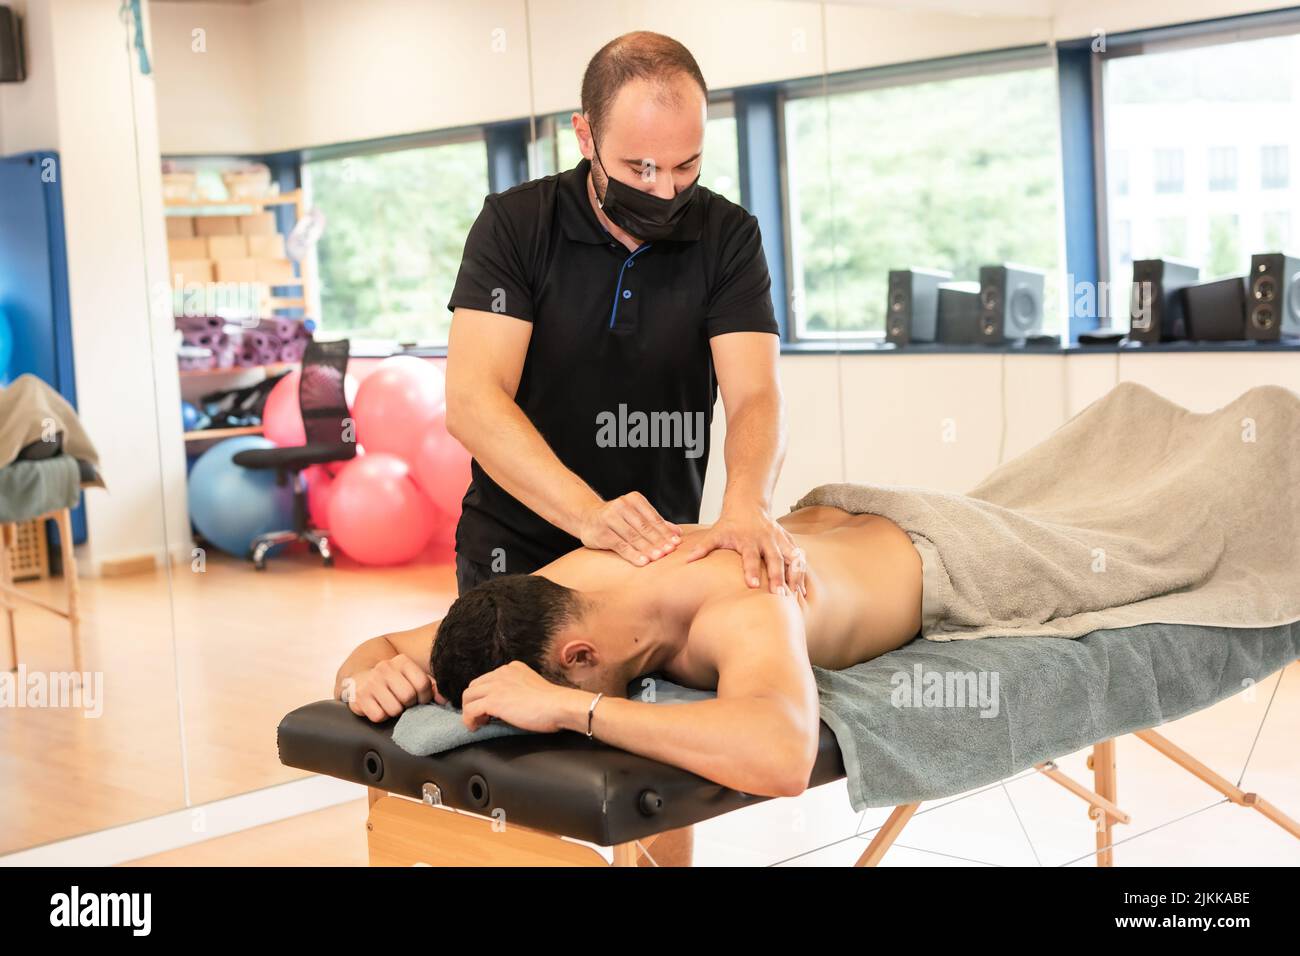 An athletic man receiving a recovery massage by a physiotherapist on a stretcher Stock Photo